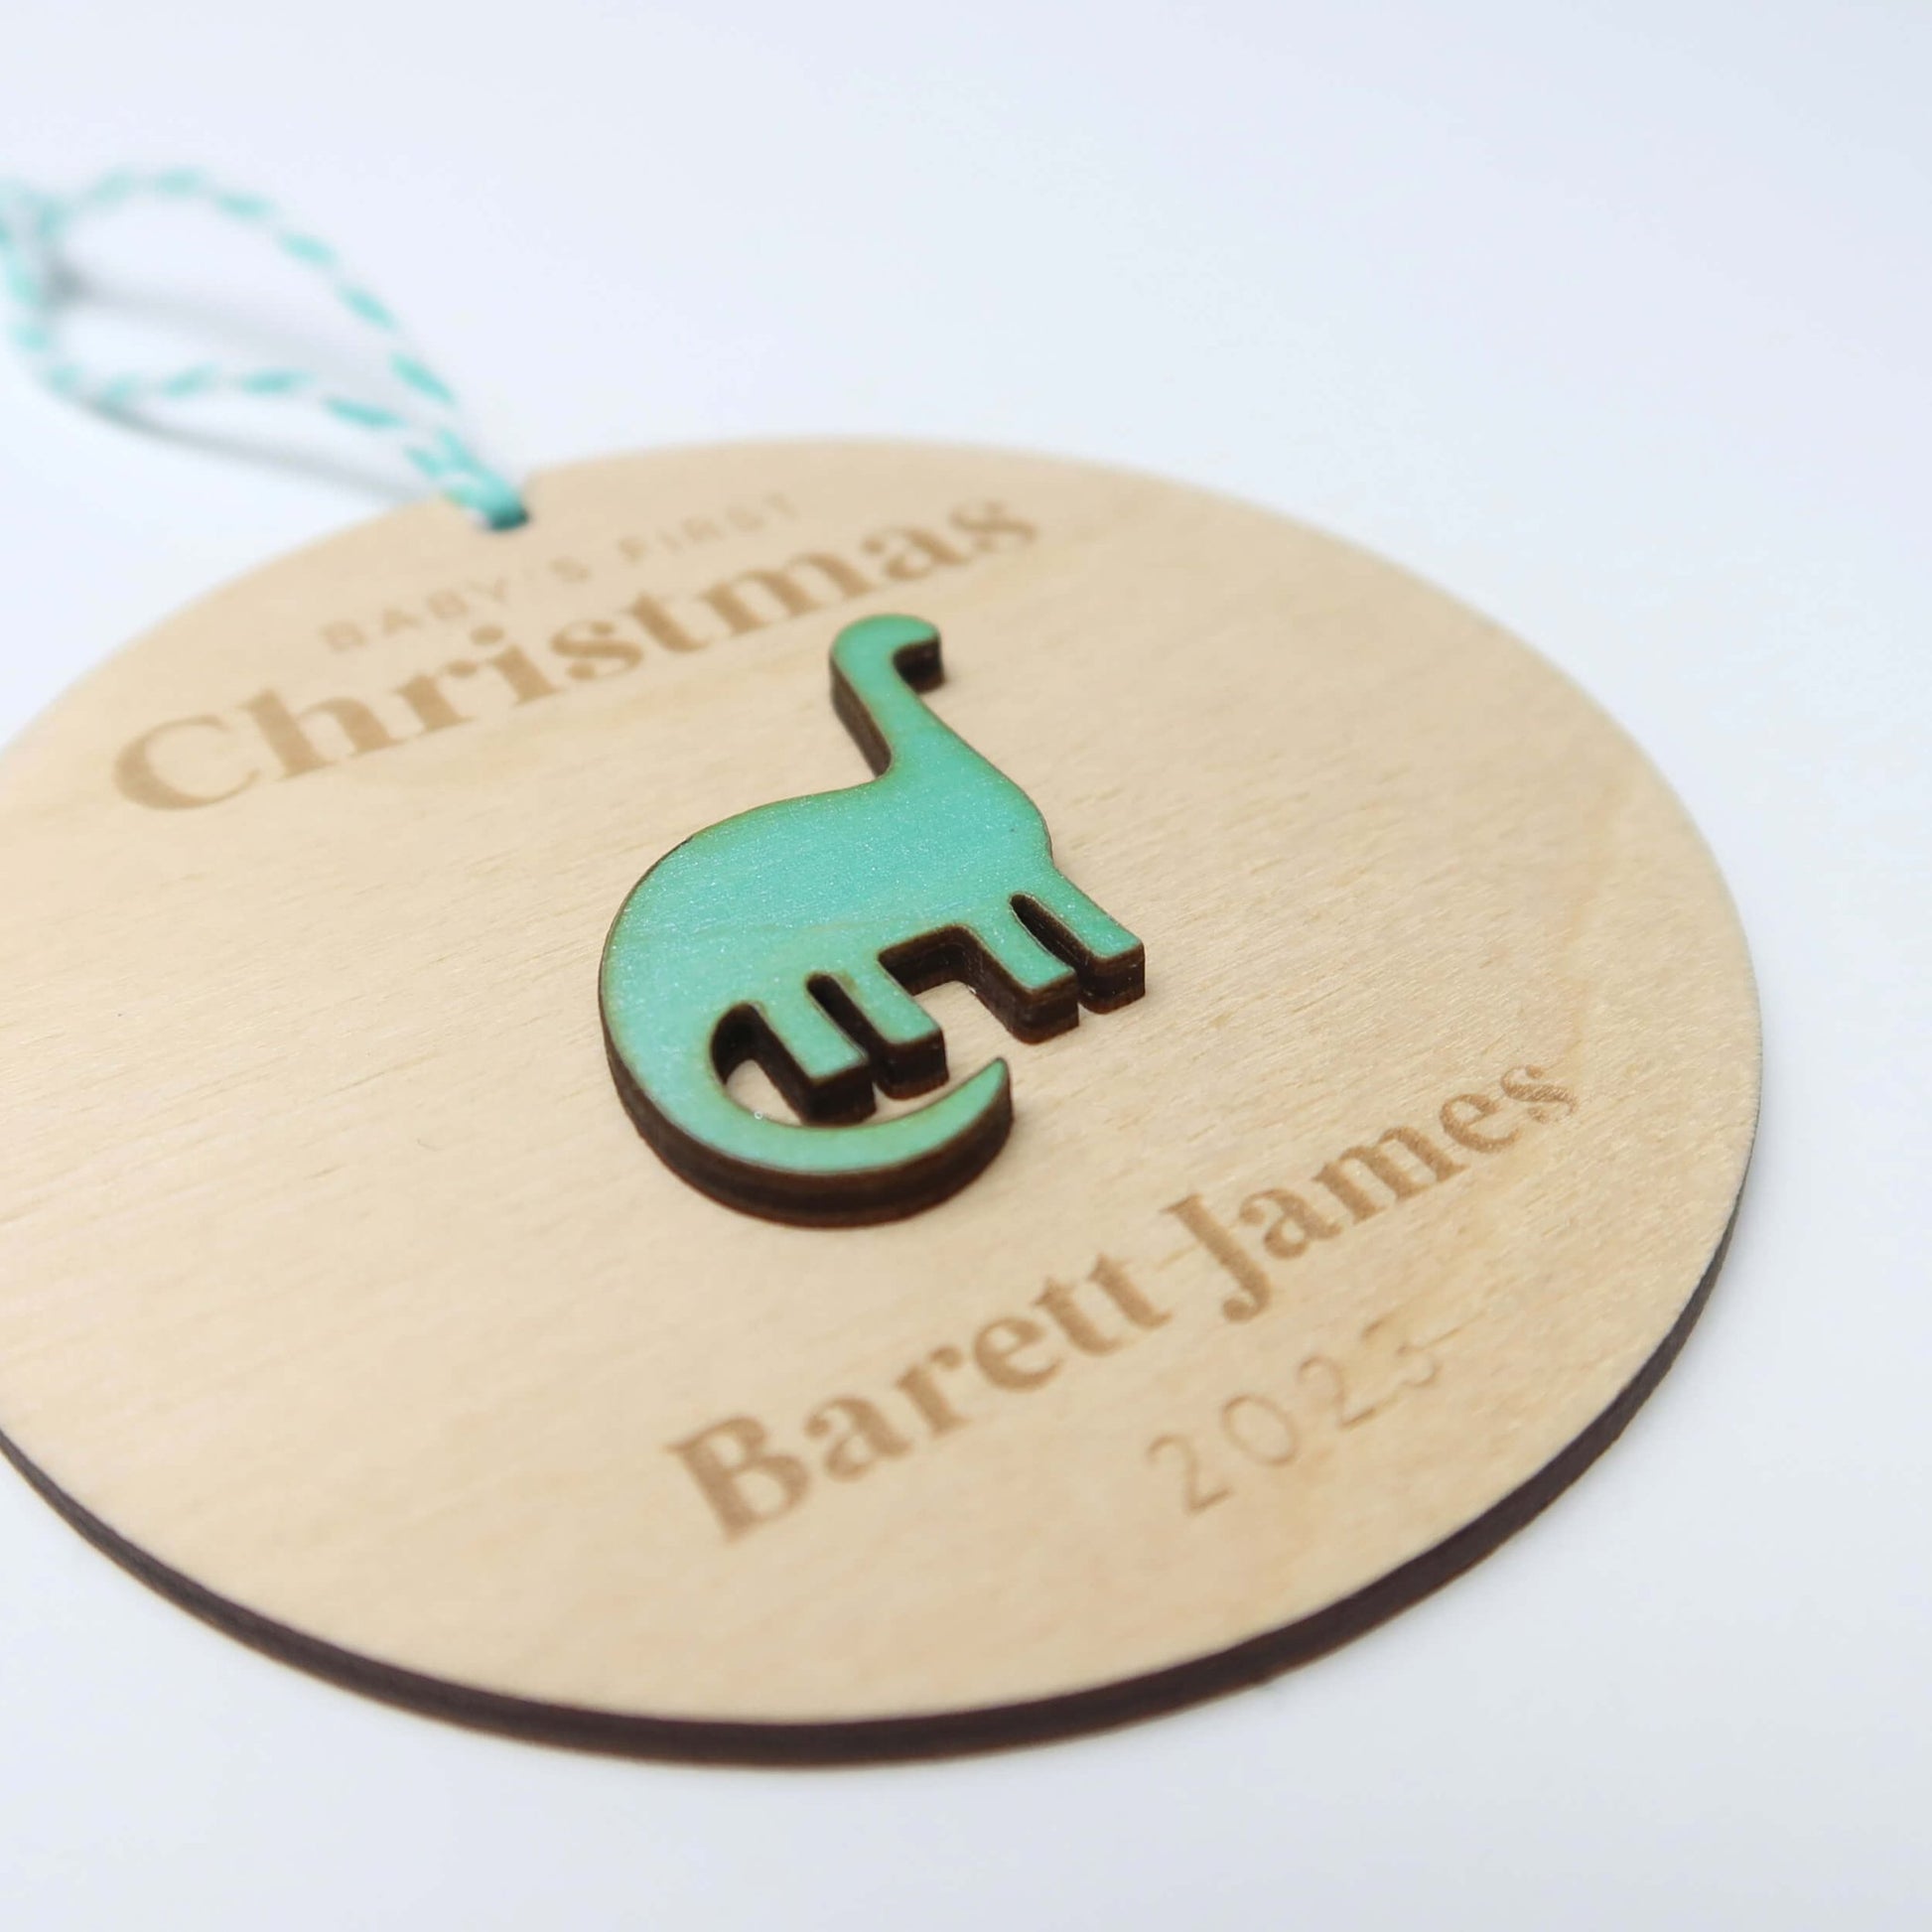 Dinosaur Baby's First Christmas Ornament Personalized - Holiday Ornaments - Moon Rock Prints